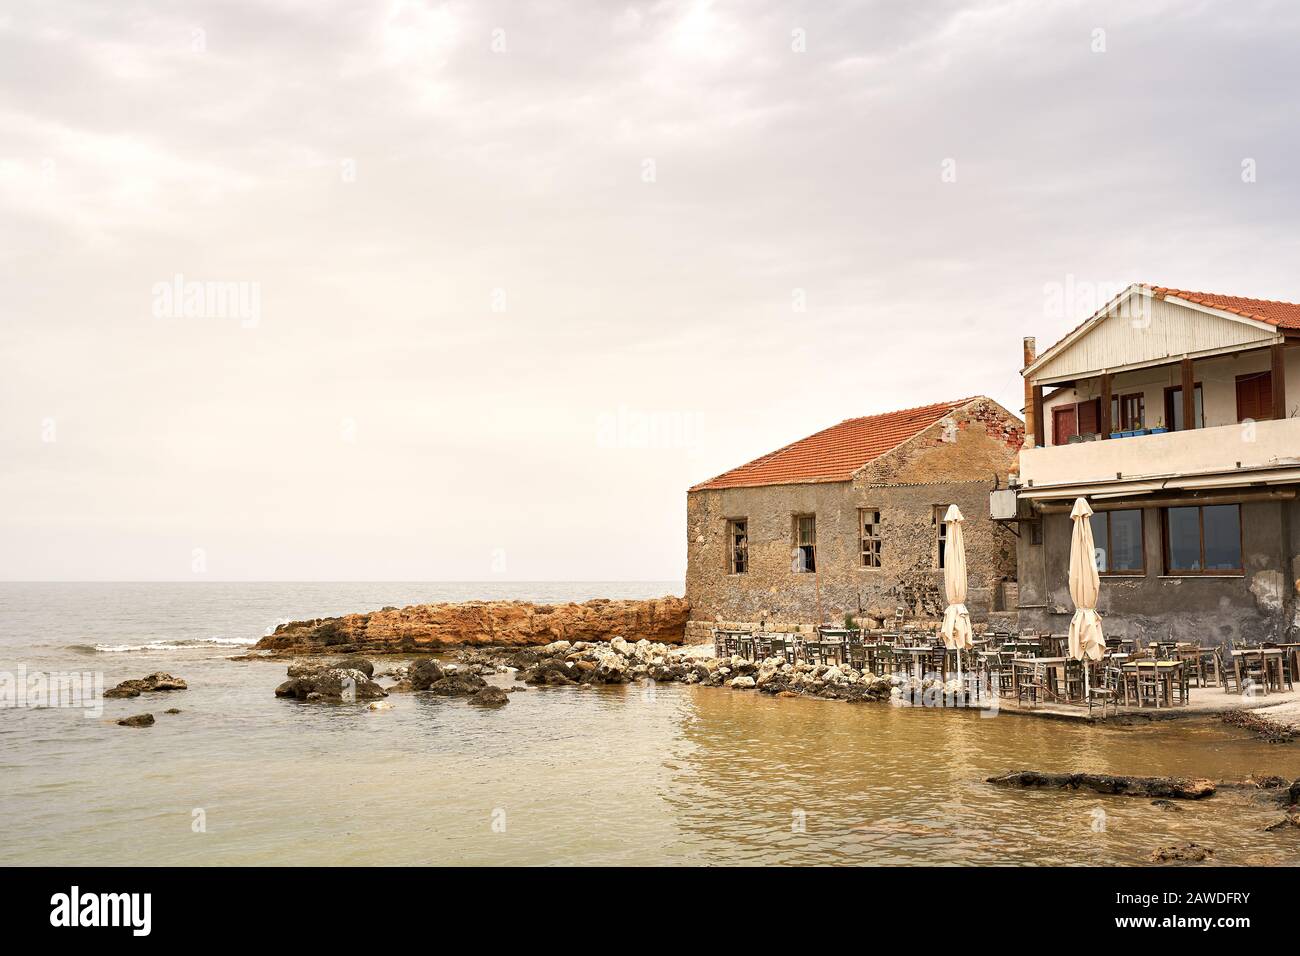 Chania, Crete, Greece. May 20, 2019. Restaurant along the shore of The Venetian Harbour in Chania western Crete in summer. Stock Photo